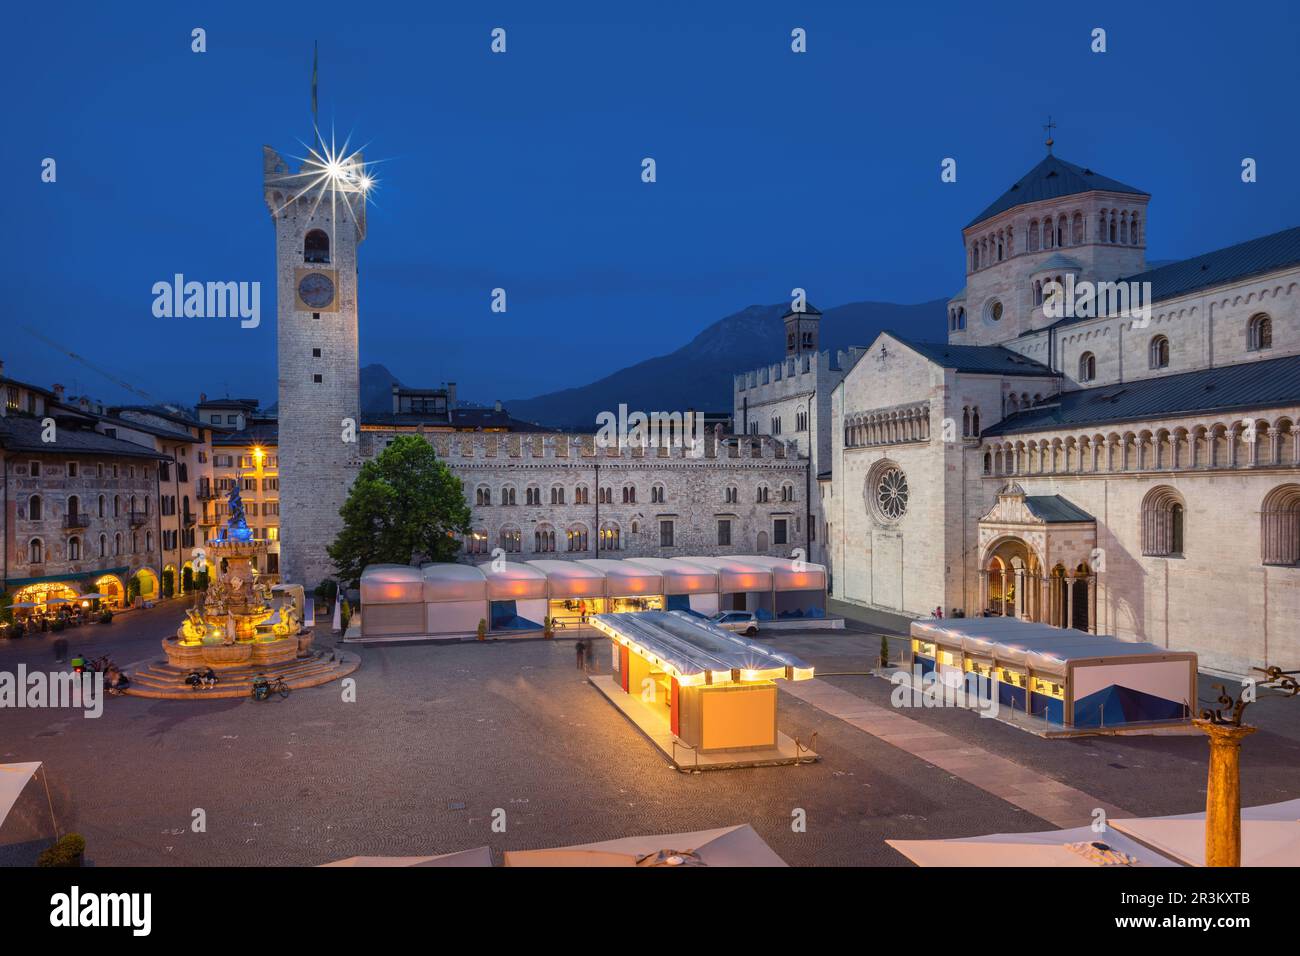 Trento, Italy - View of Piazza del Duomo square with cathedral and Torre Civica tower Stock Photo